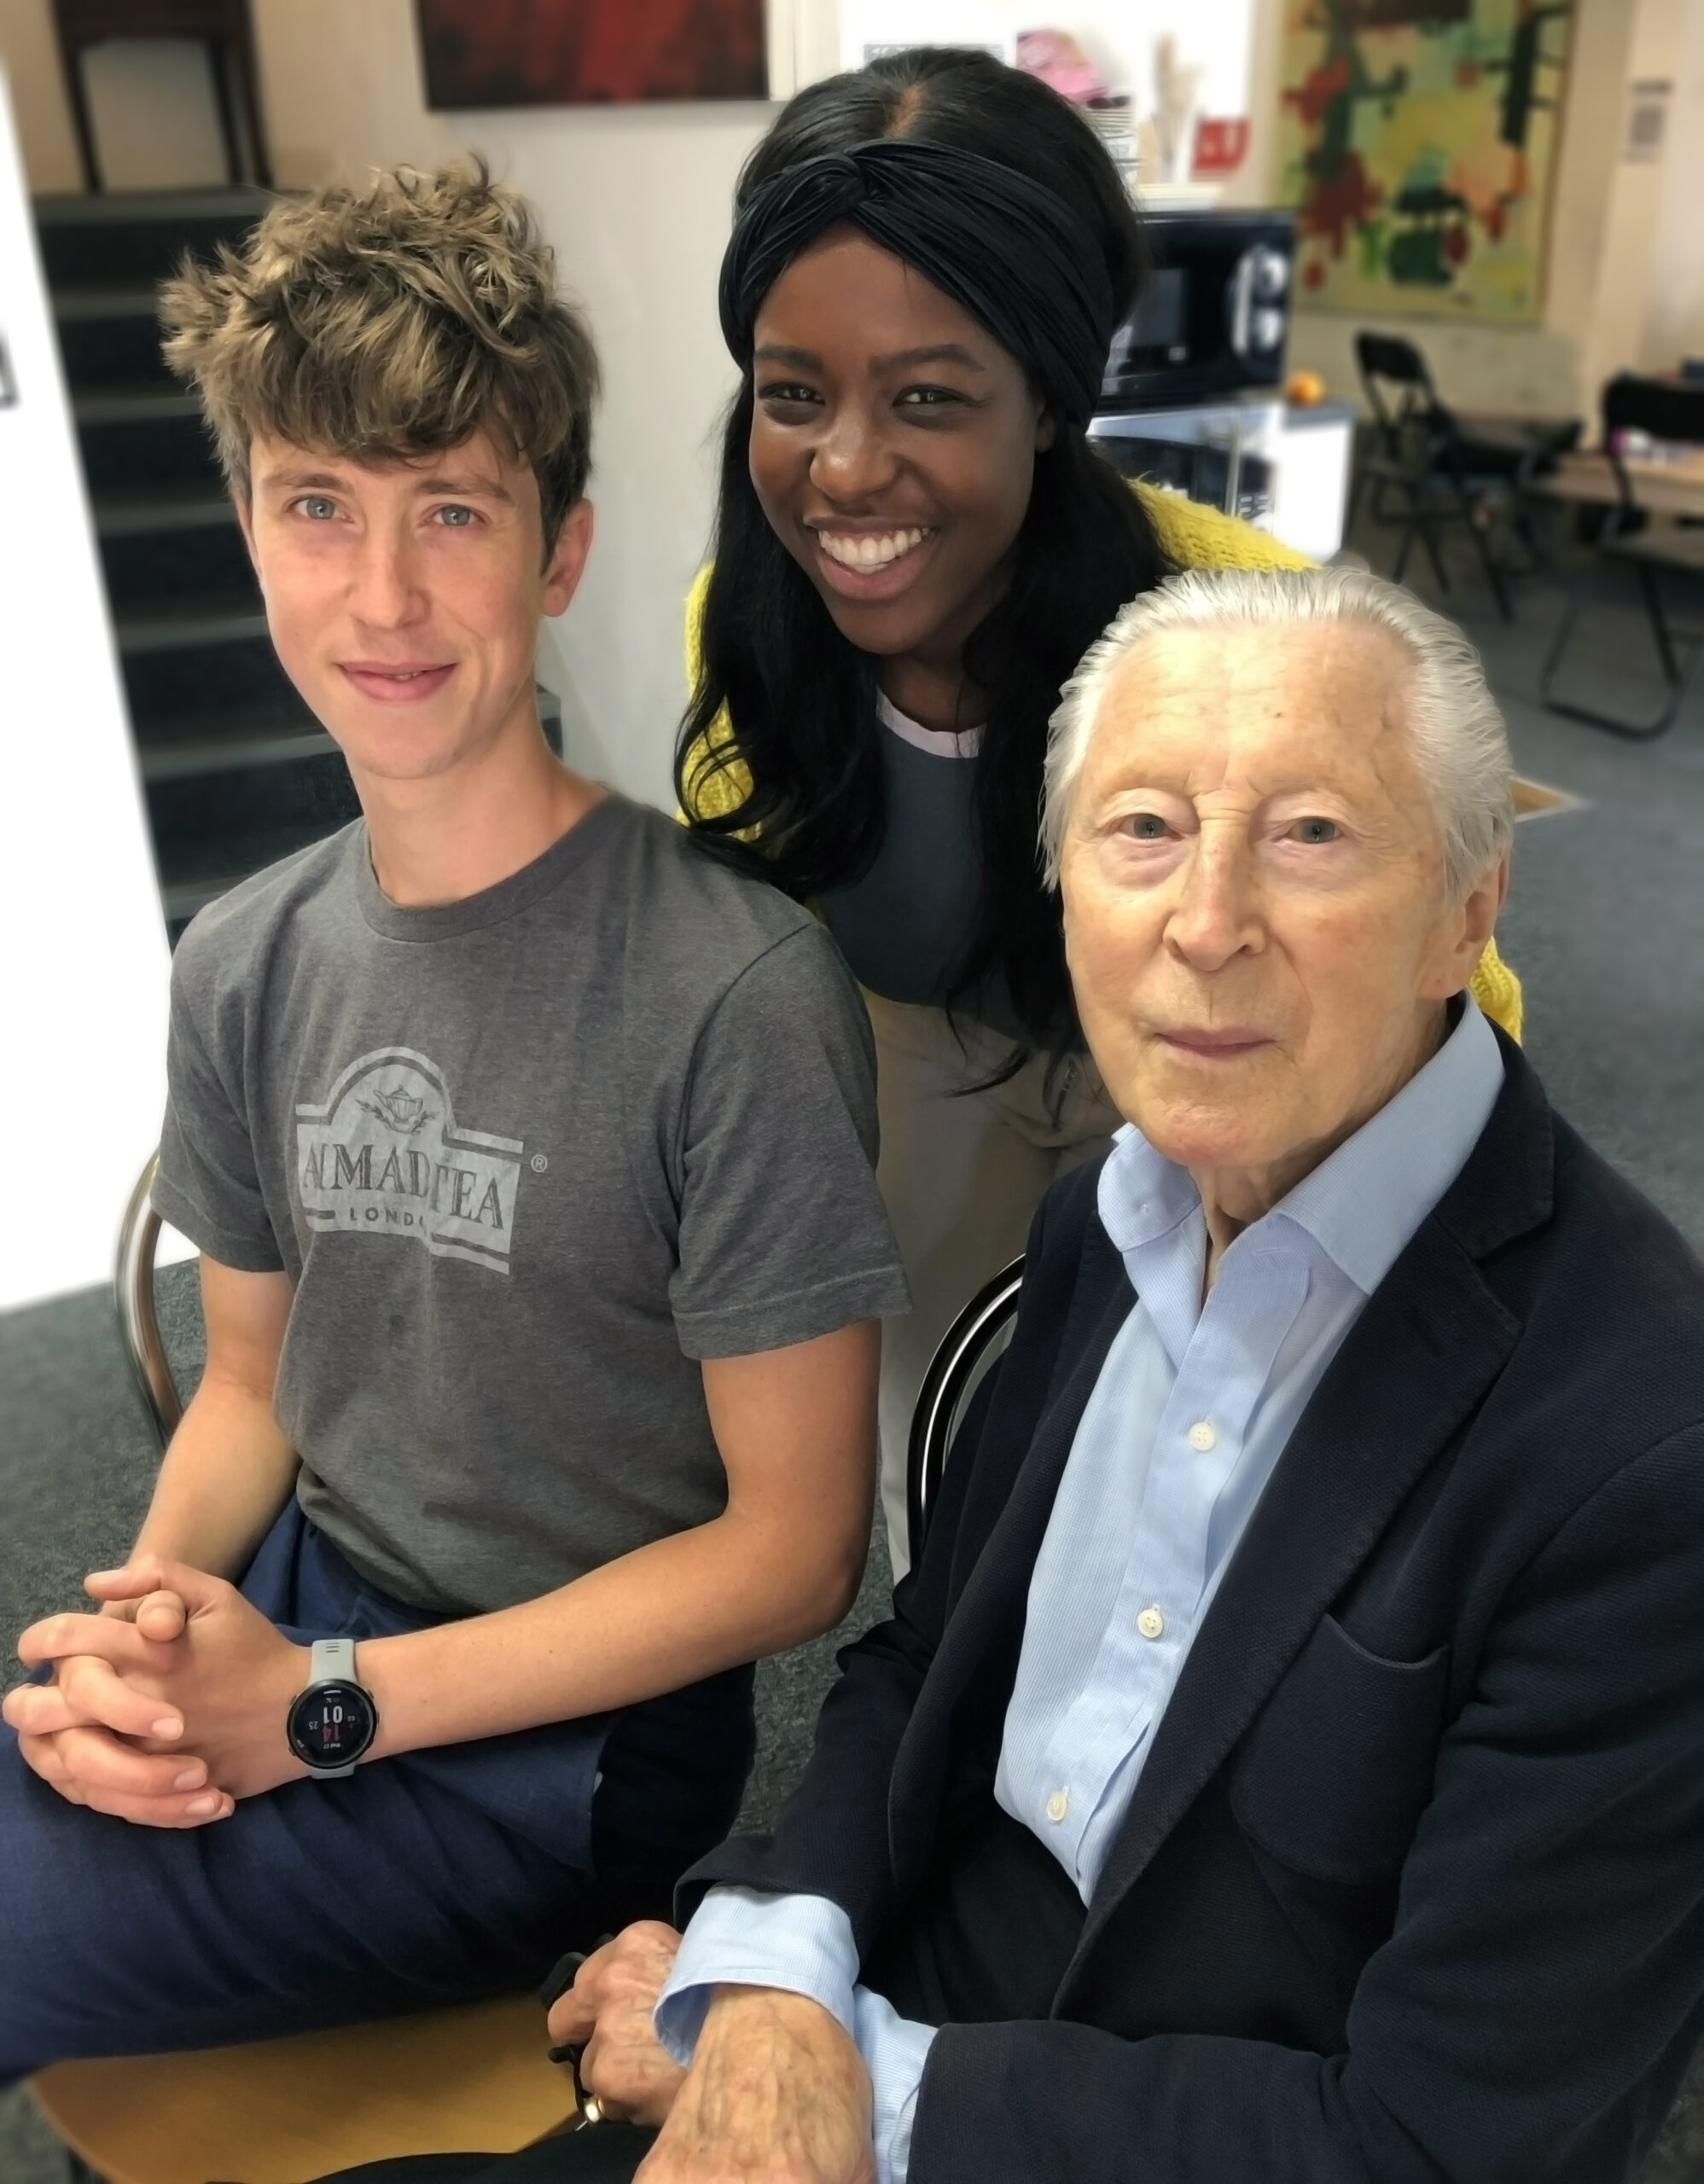 Angus Imrie, Gabrielle Brooks and Murray Melvin